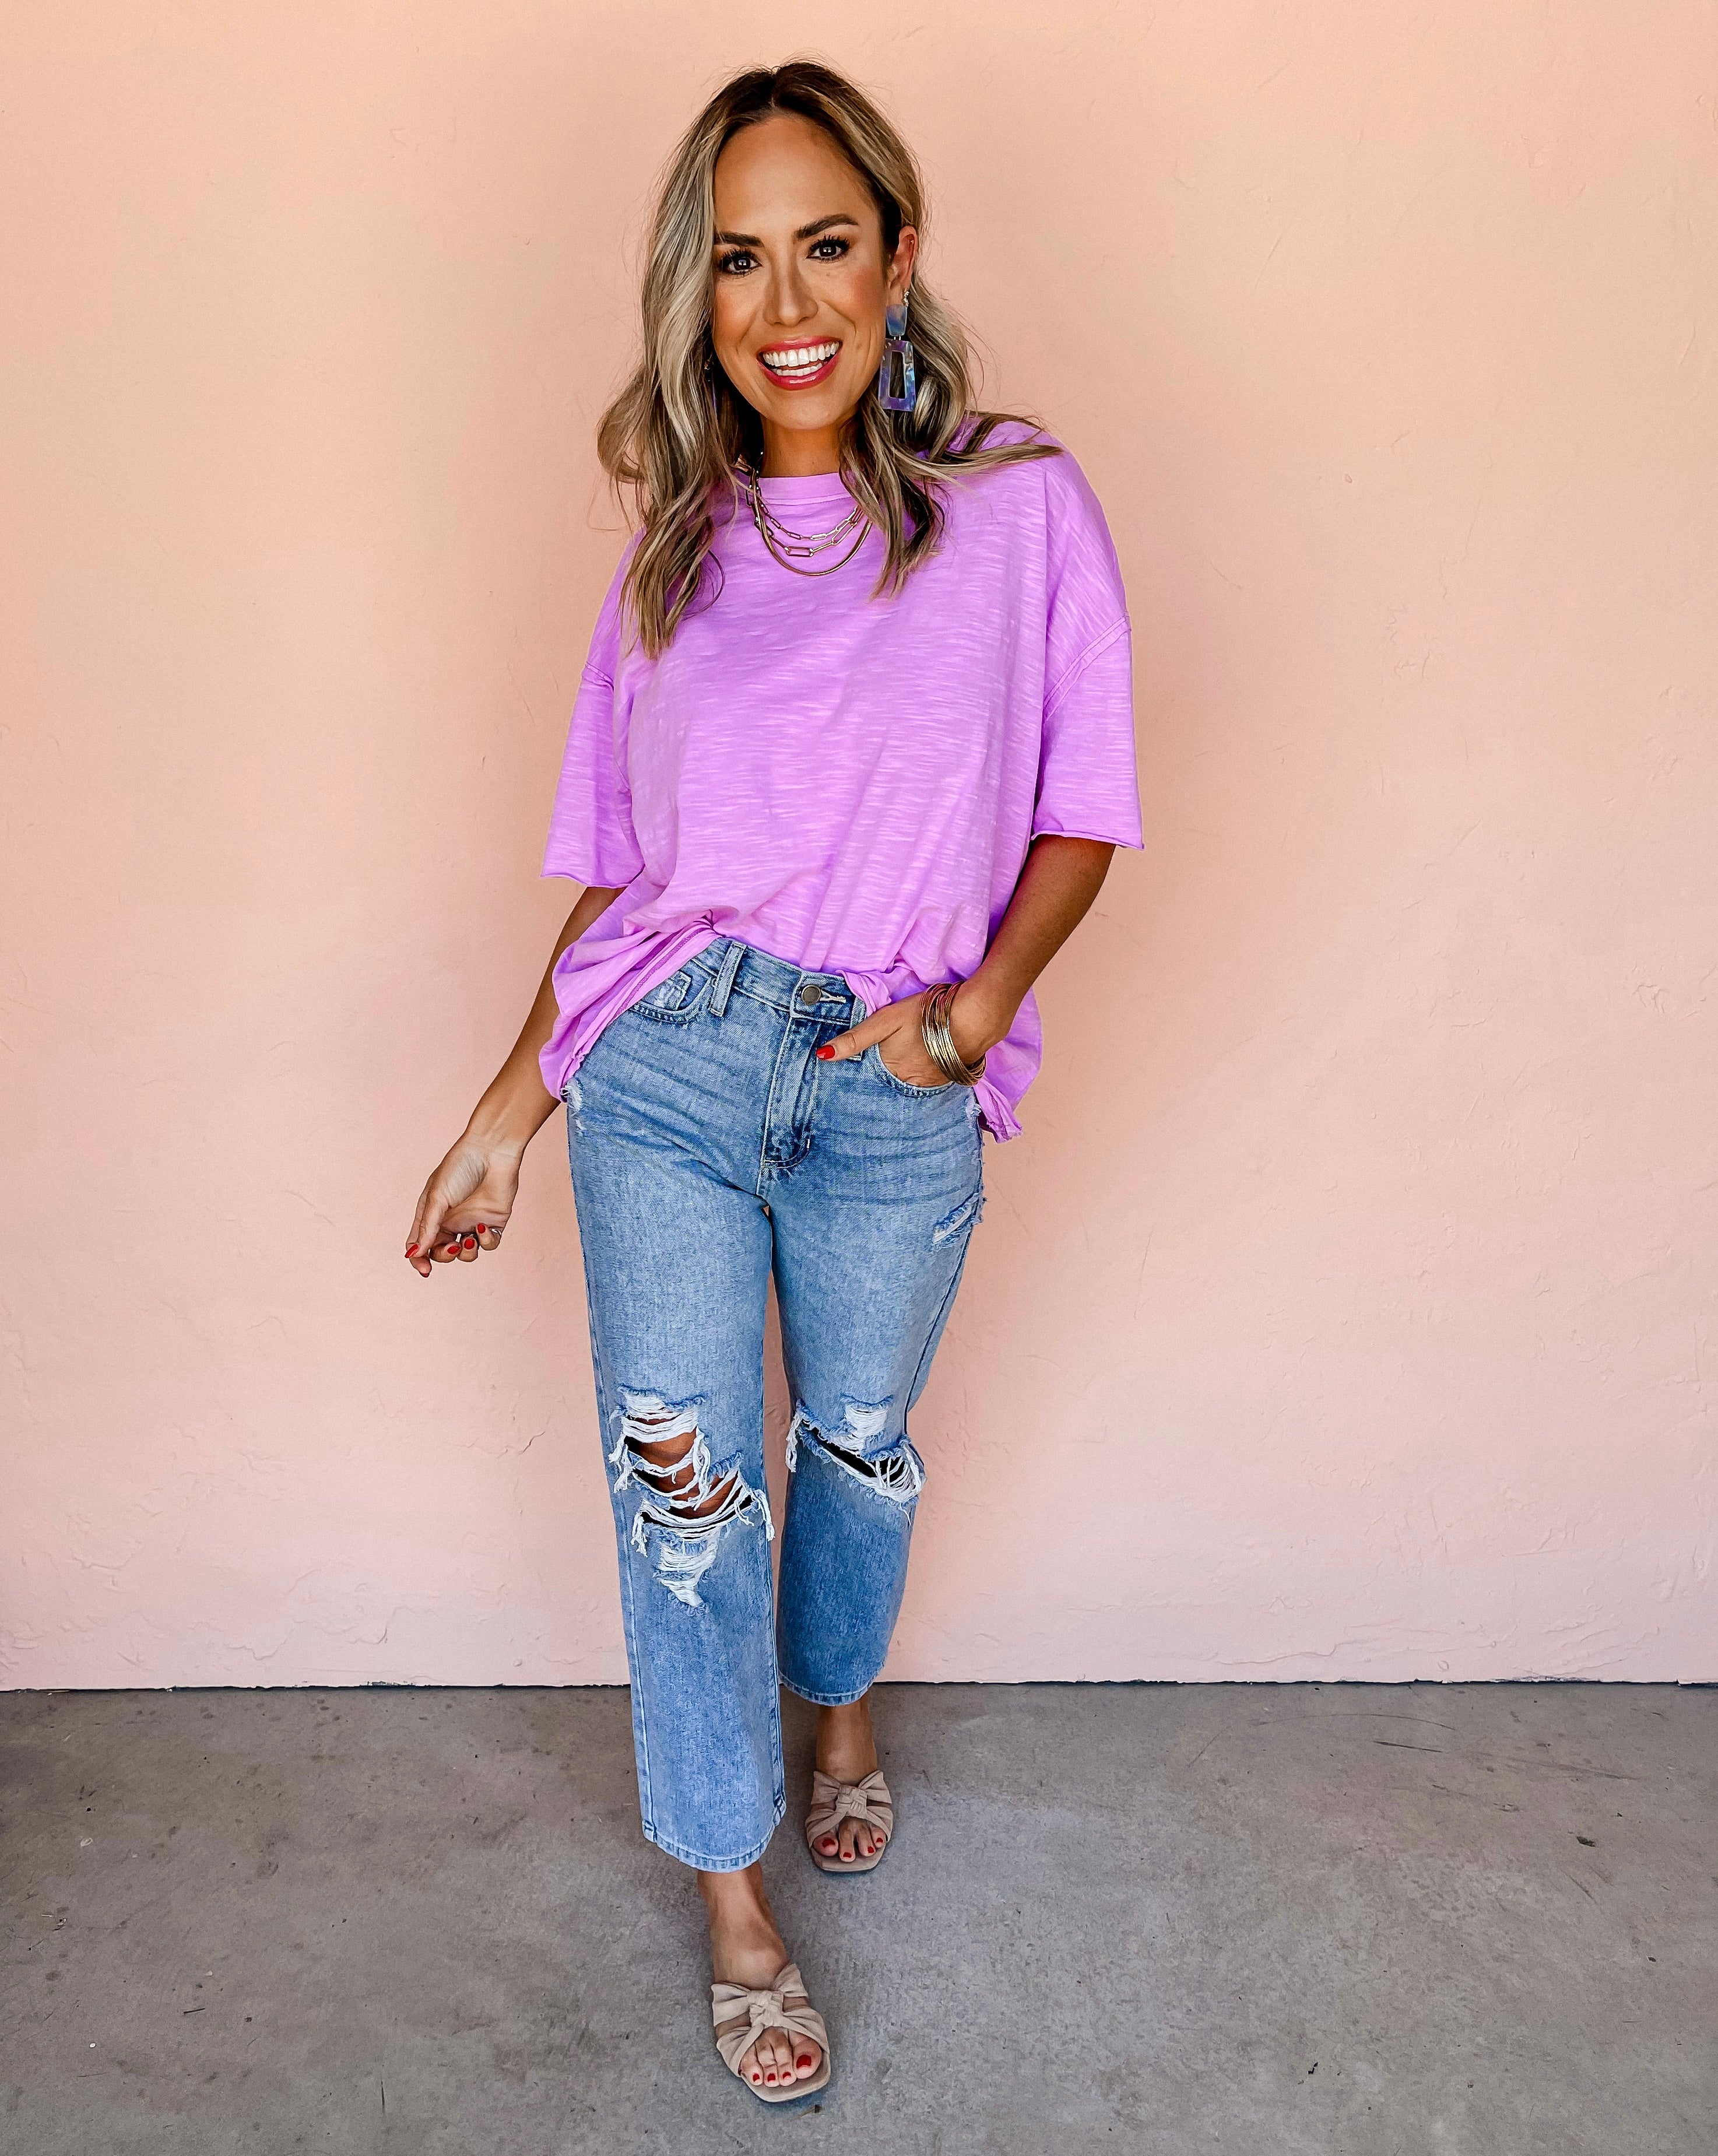 The Fun Side Short Sleeve Top-Iris Orchid